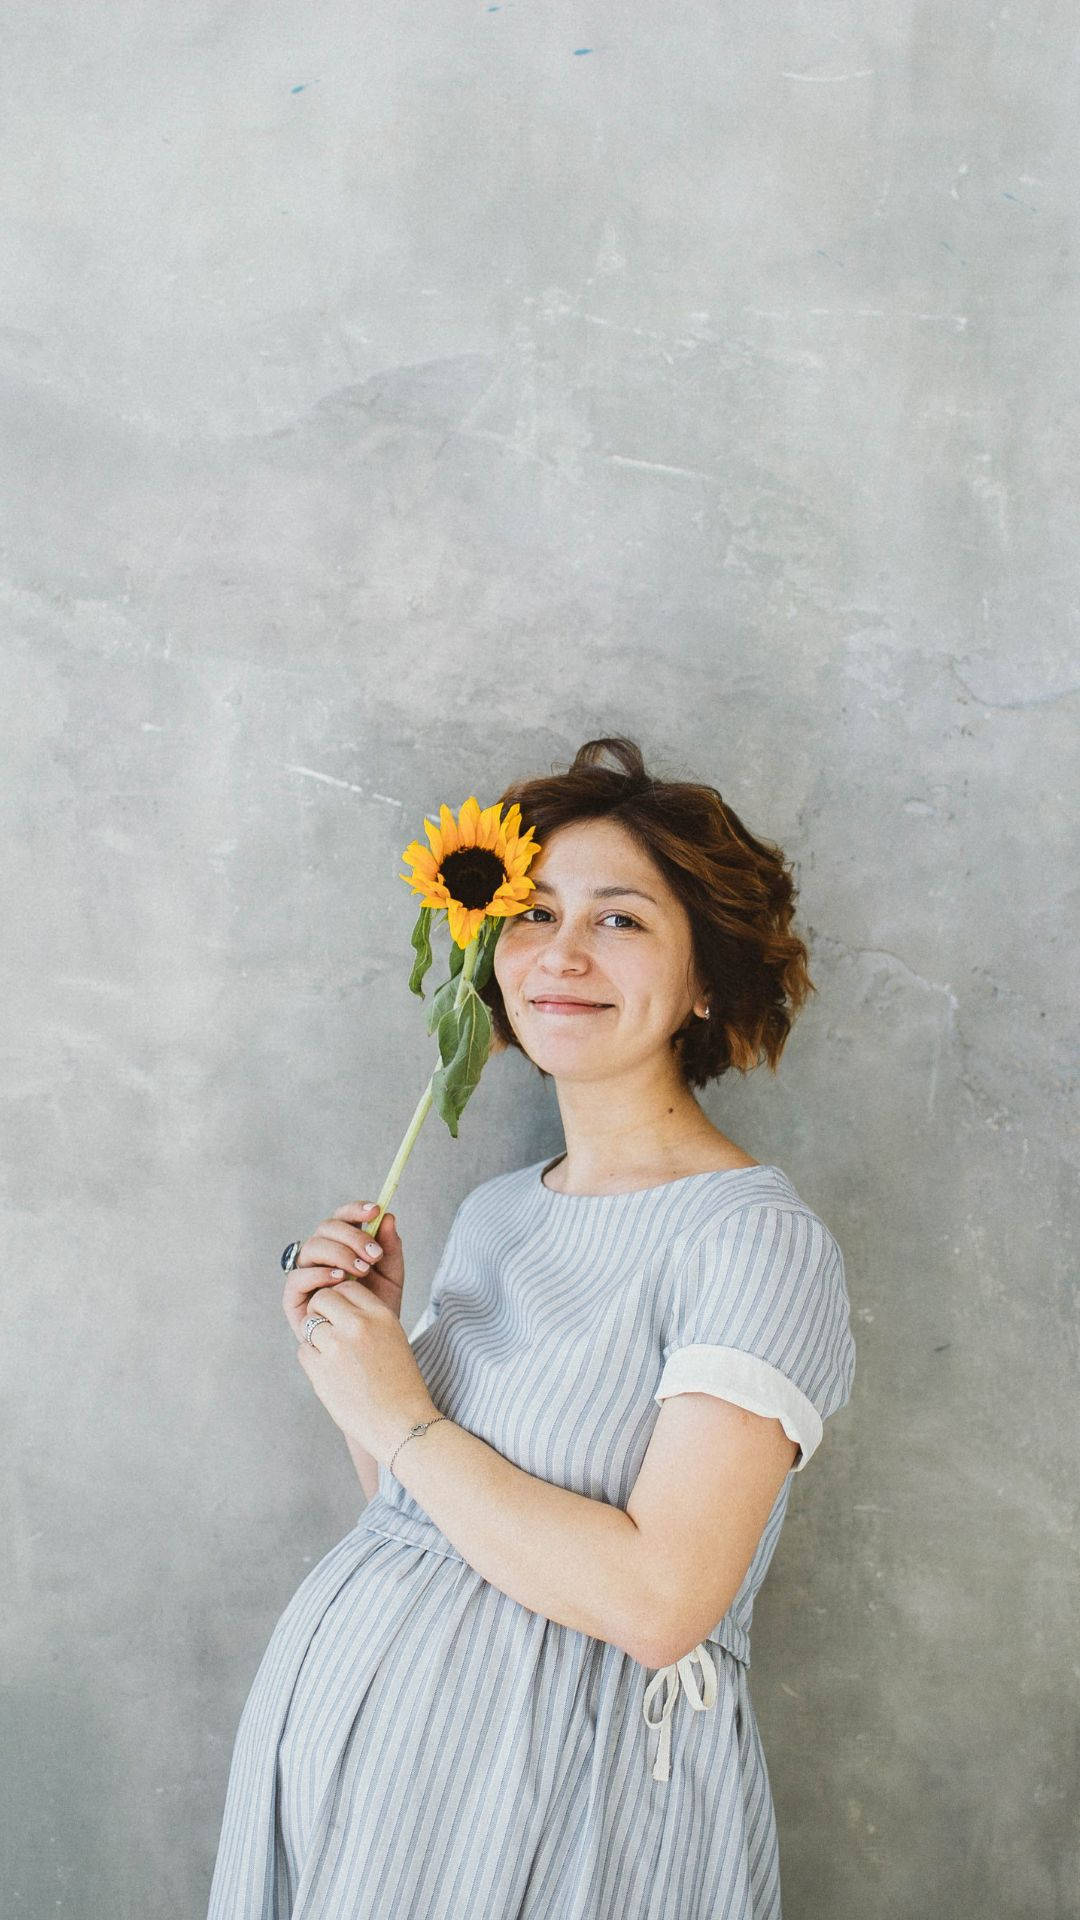 Pregnancy Woman Holding Sunflower Background